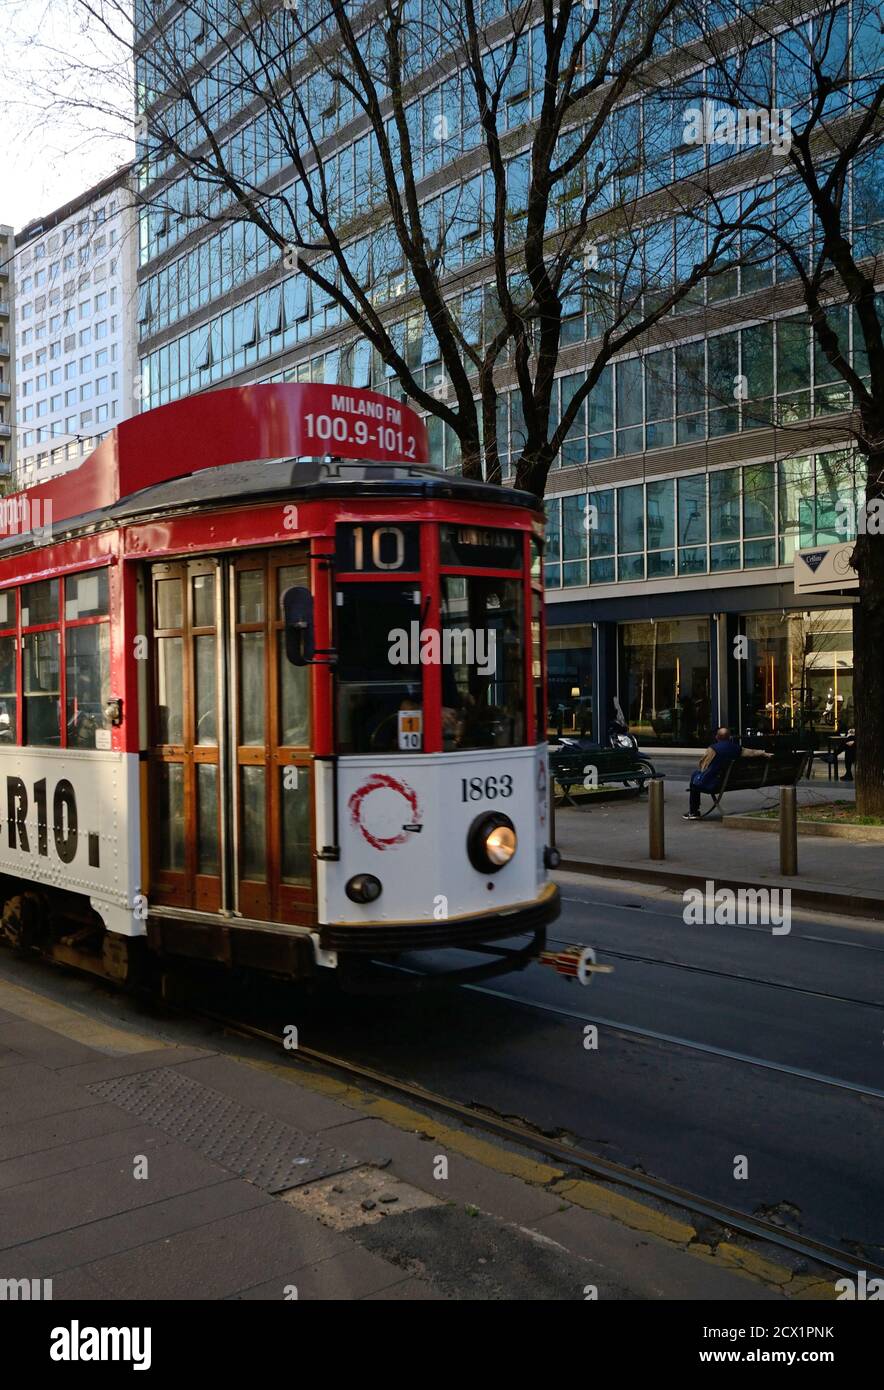 typical old tram passing in a city street Stock Photo